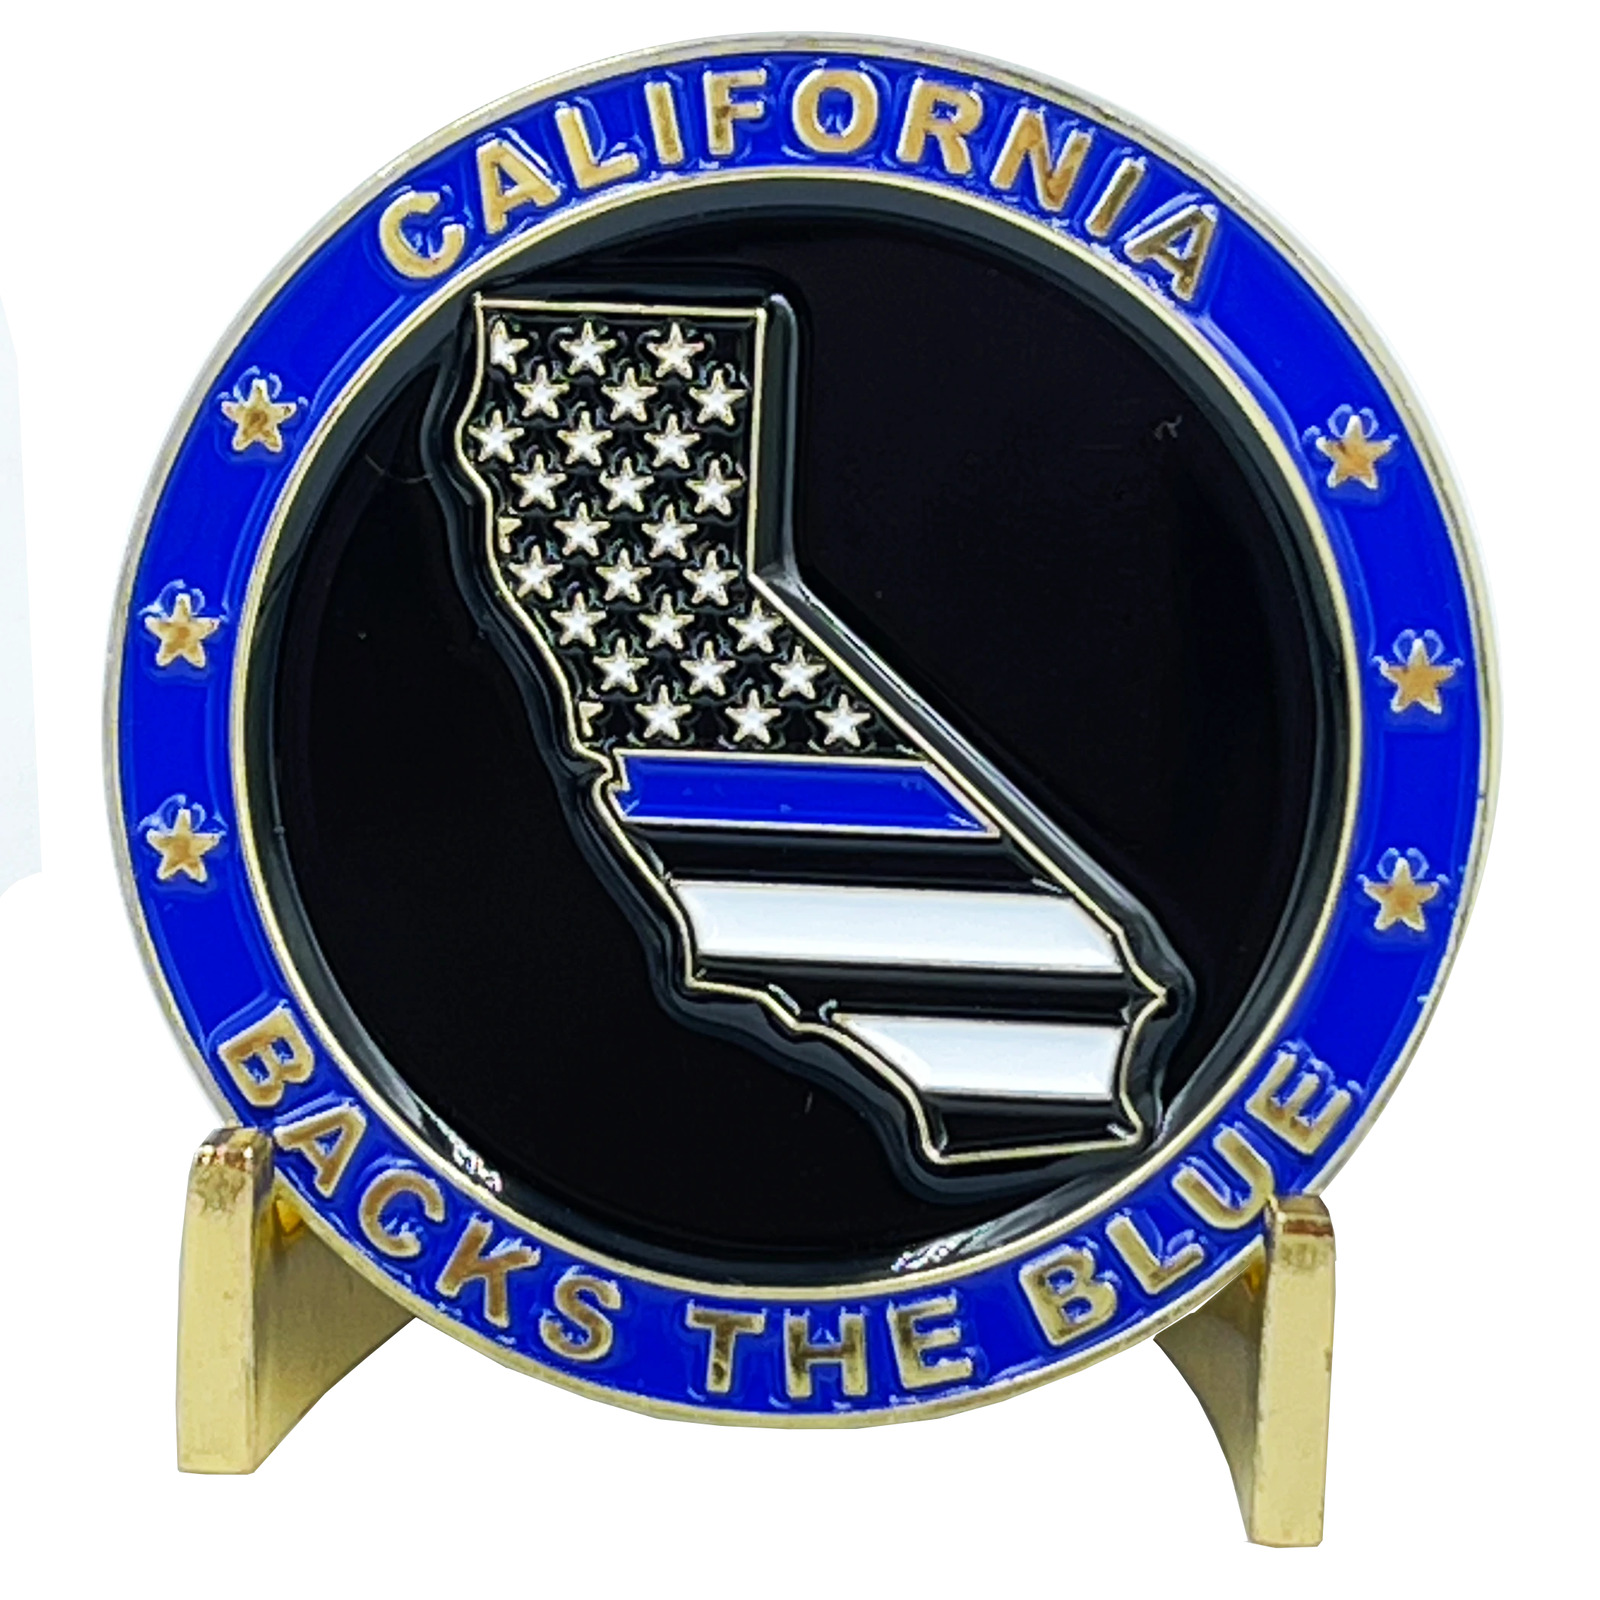 BL3-003 California BACKS THE BLUE Thin Blue Line Police Challenge Coin with free